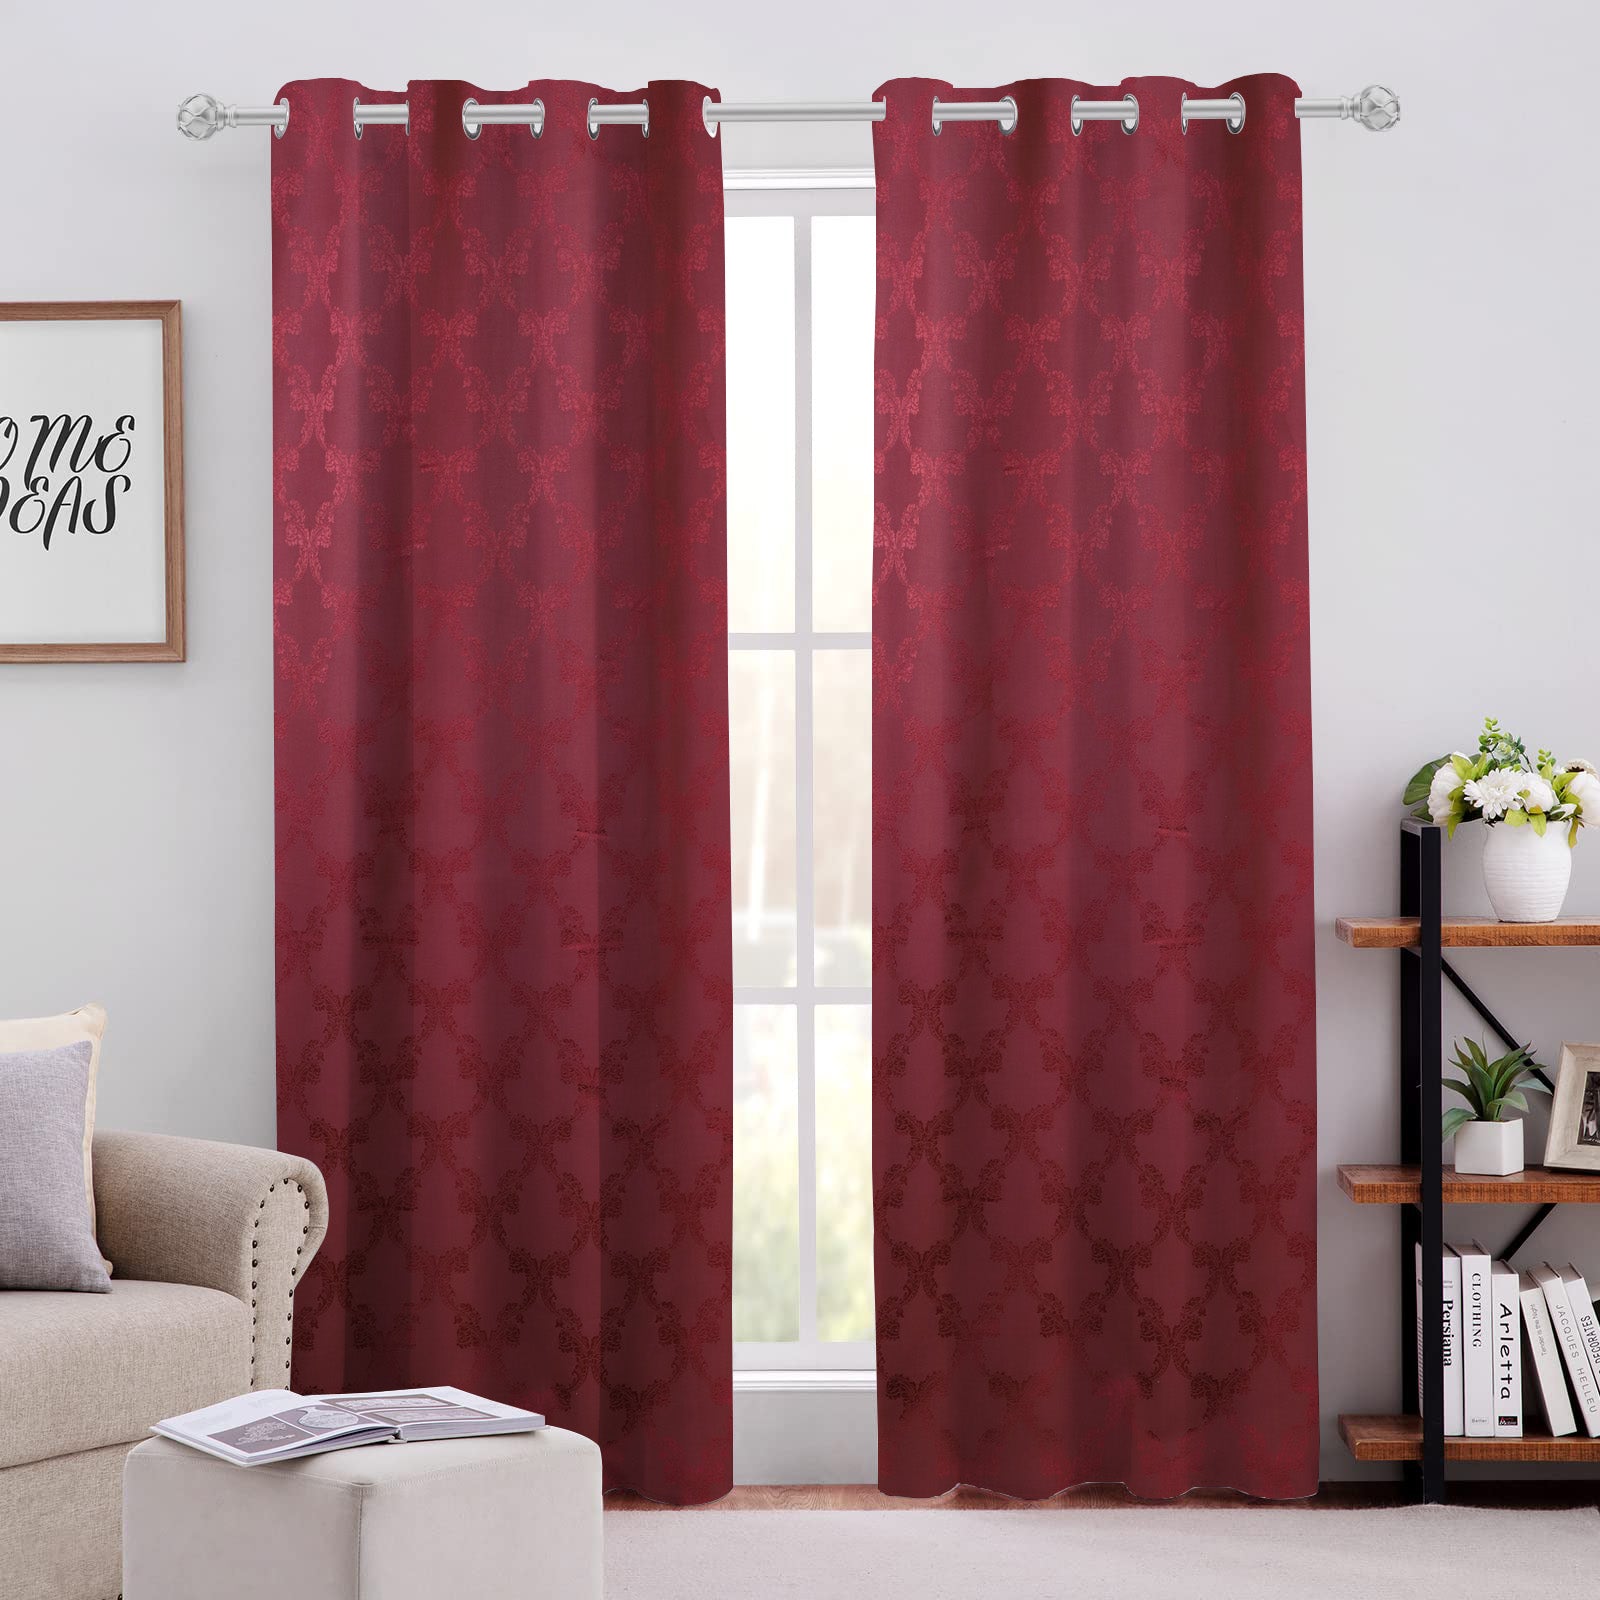 Cotton Jacquard Burgundy Self Design Curtain with Grommets